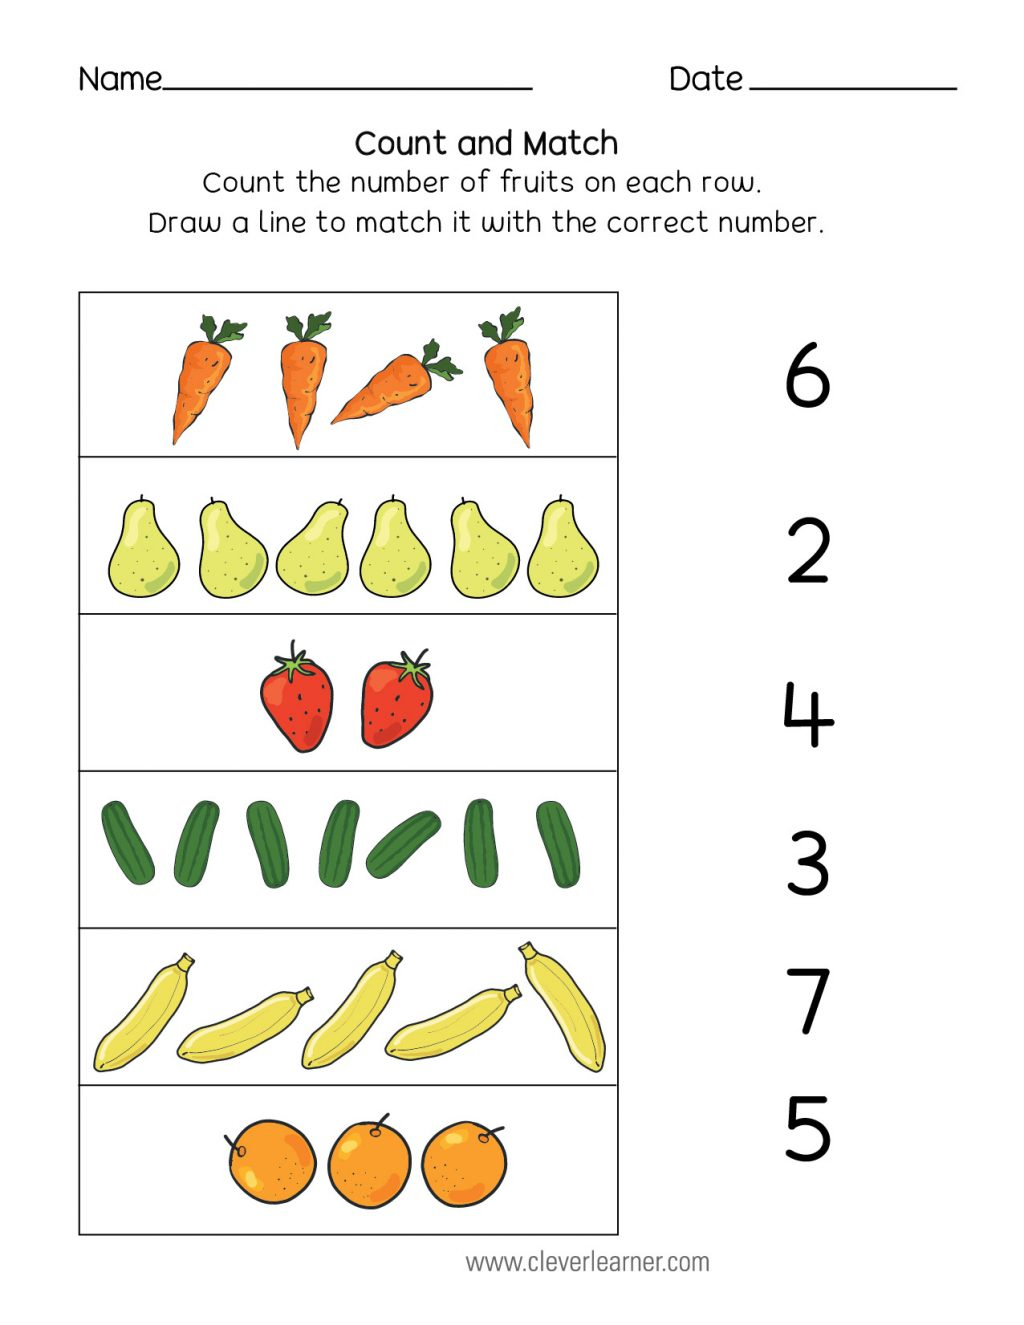 Free Alphabet Matching Worksheets For Kindergarten Number in Alphabet Matching Worksheets For Nursery